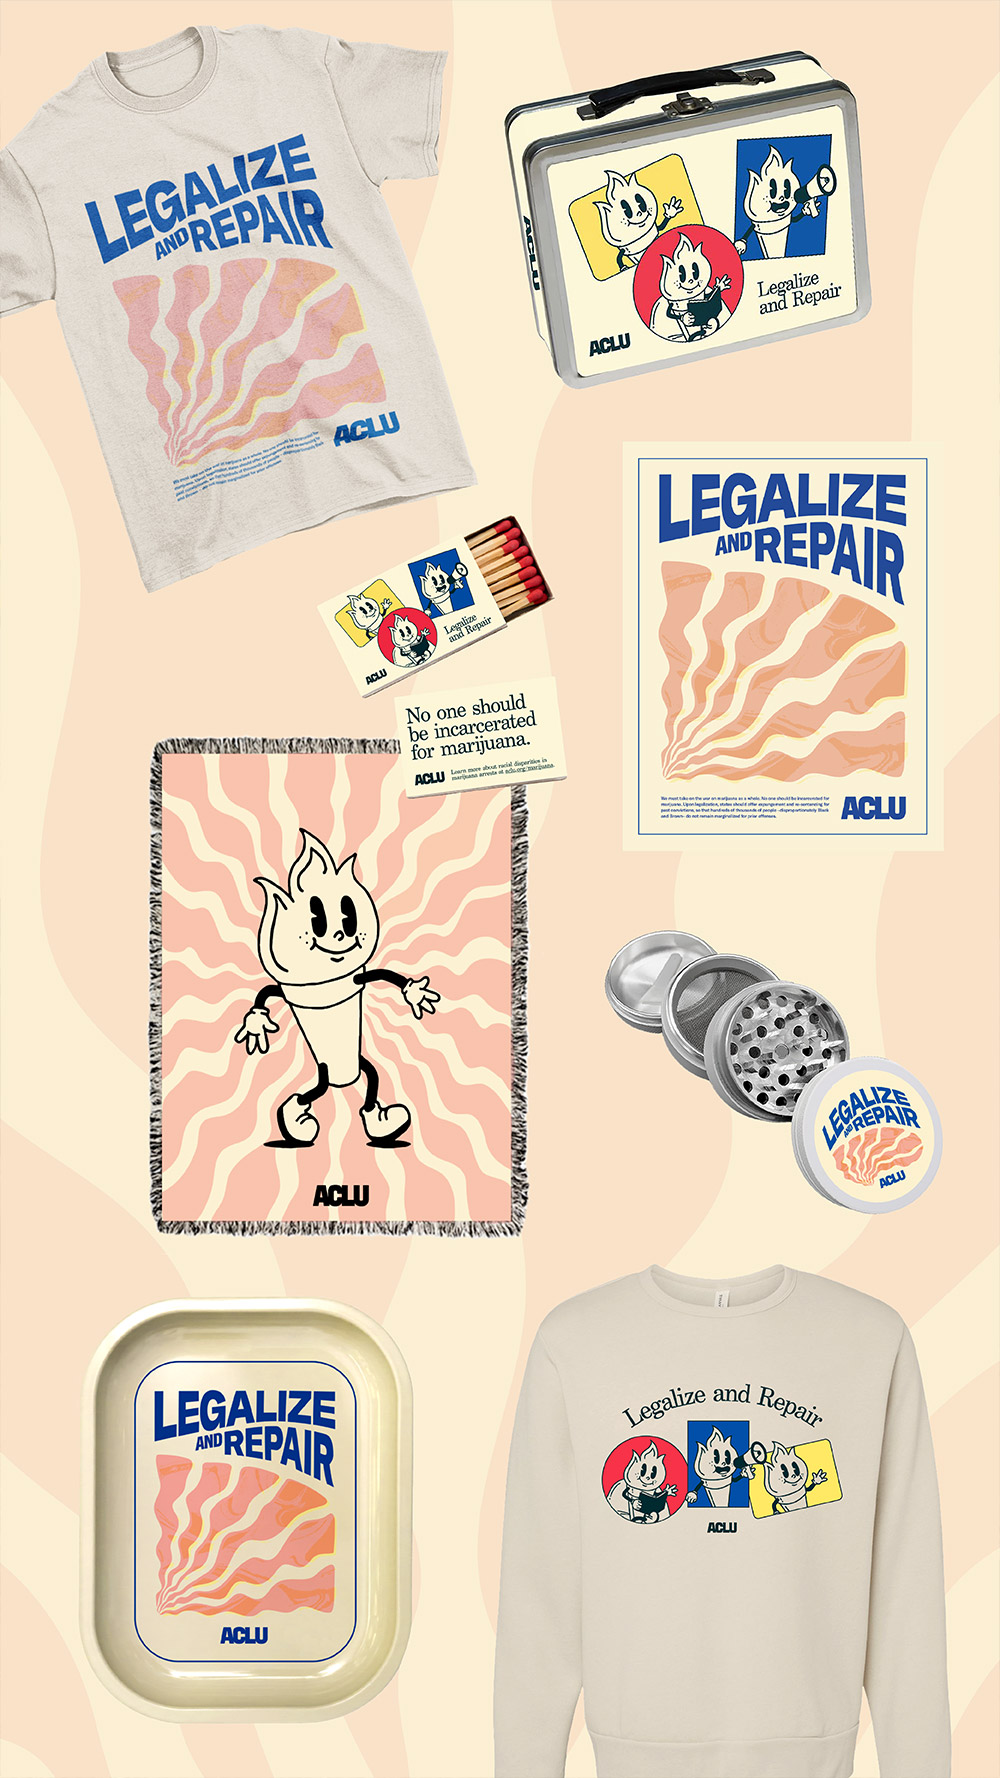 A collage-style image featuring new ACLU 420 products.